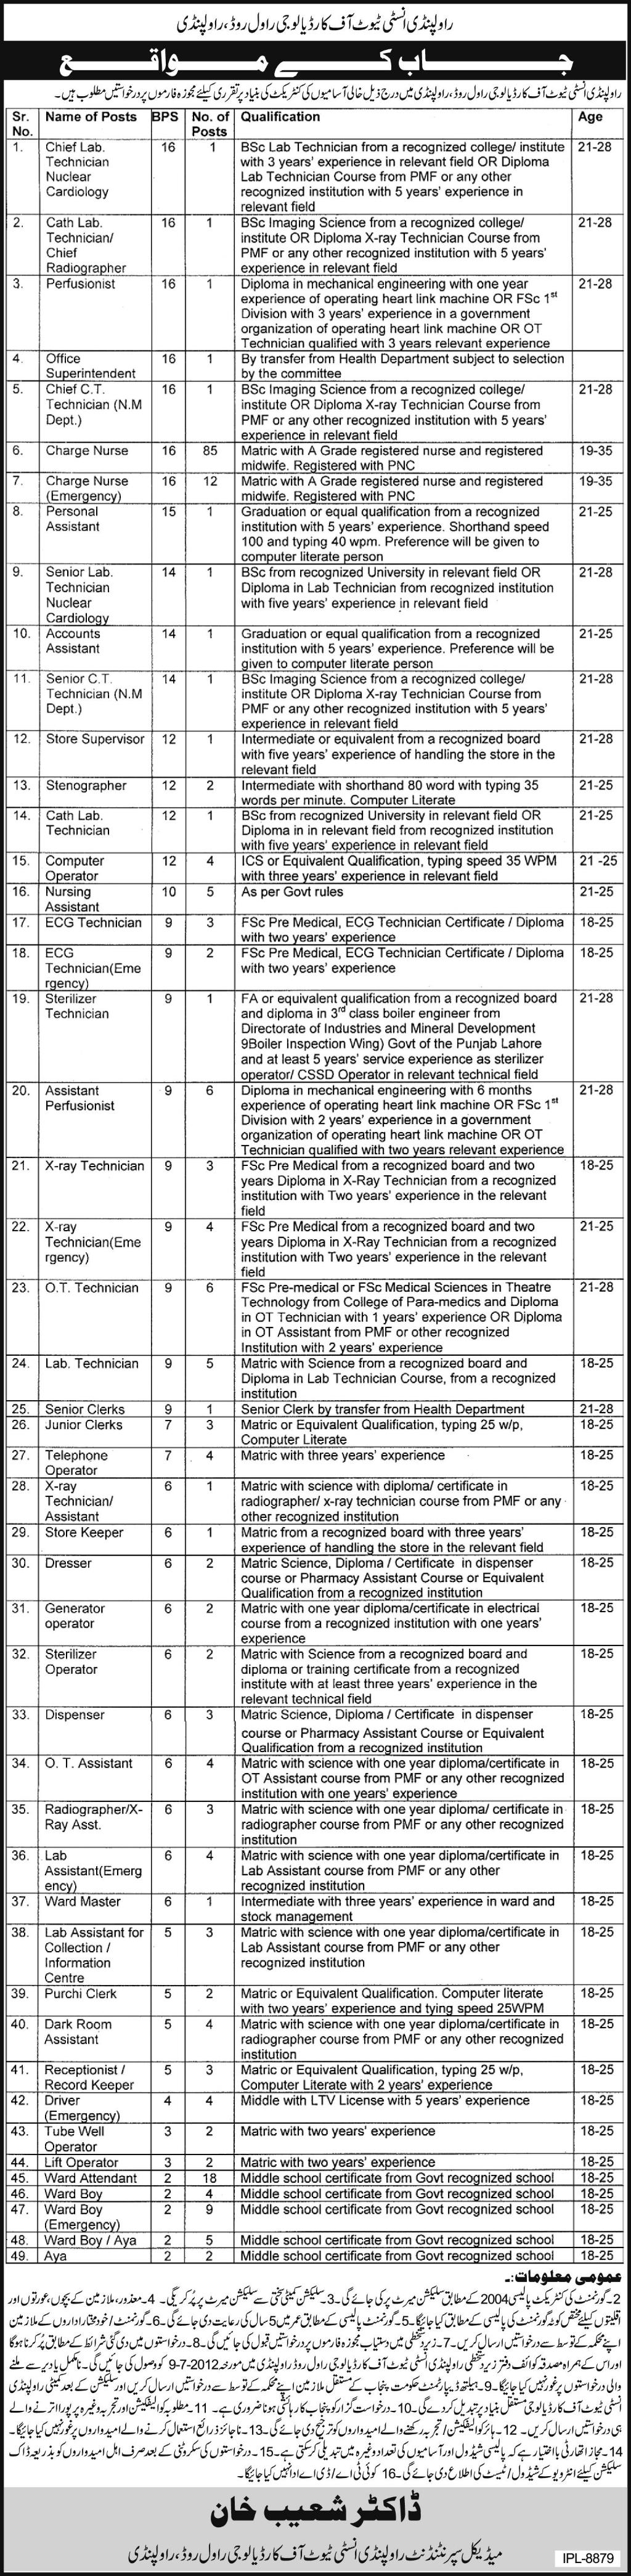 Rawalpindi Institute of Cardiology Requires Medical Technicians, Para Medical Staff and Support Staff (Govt. job)